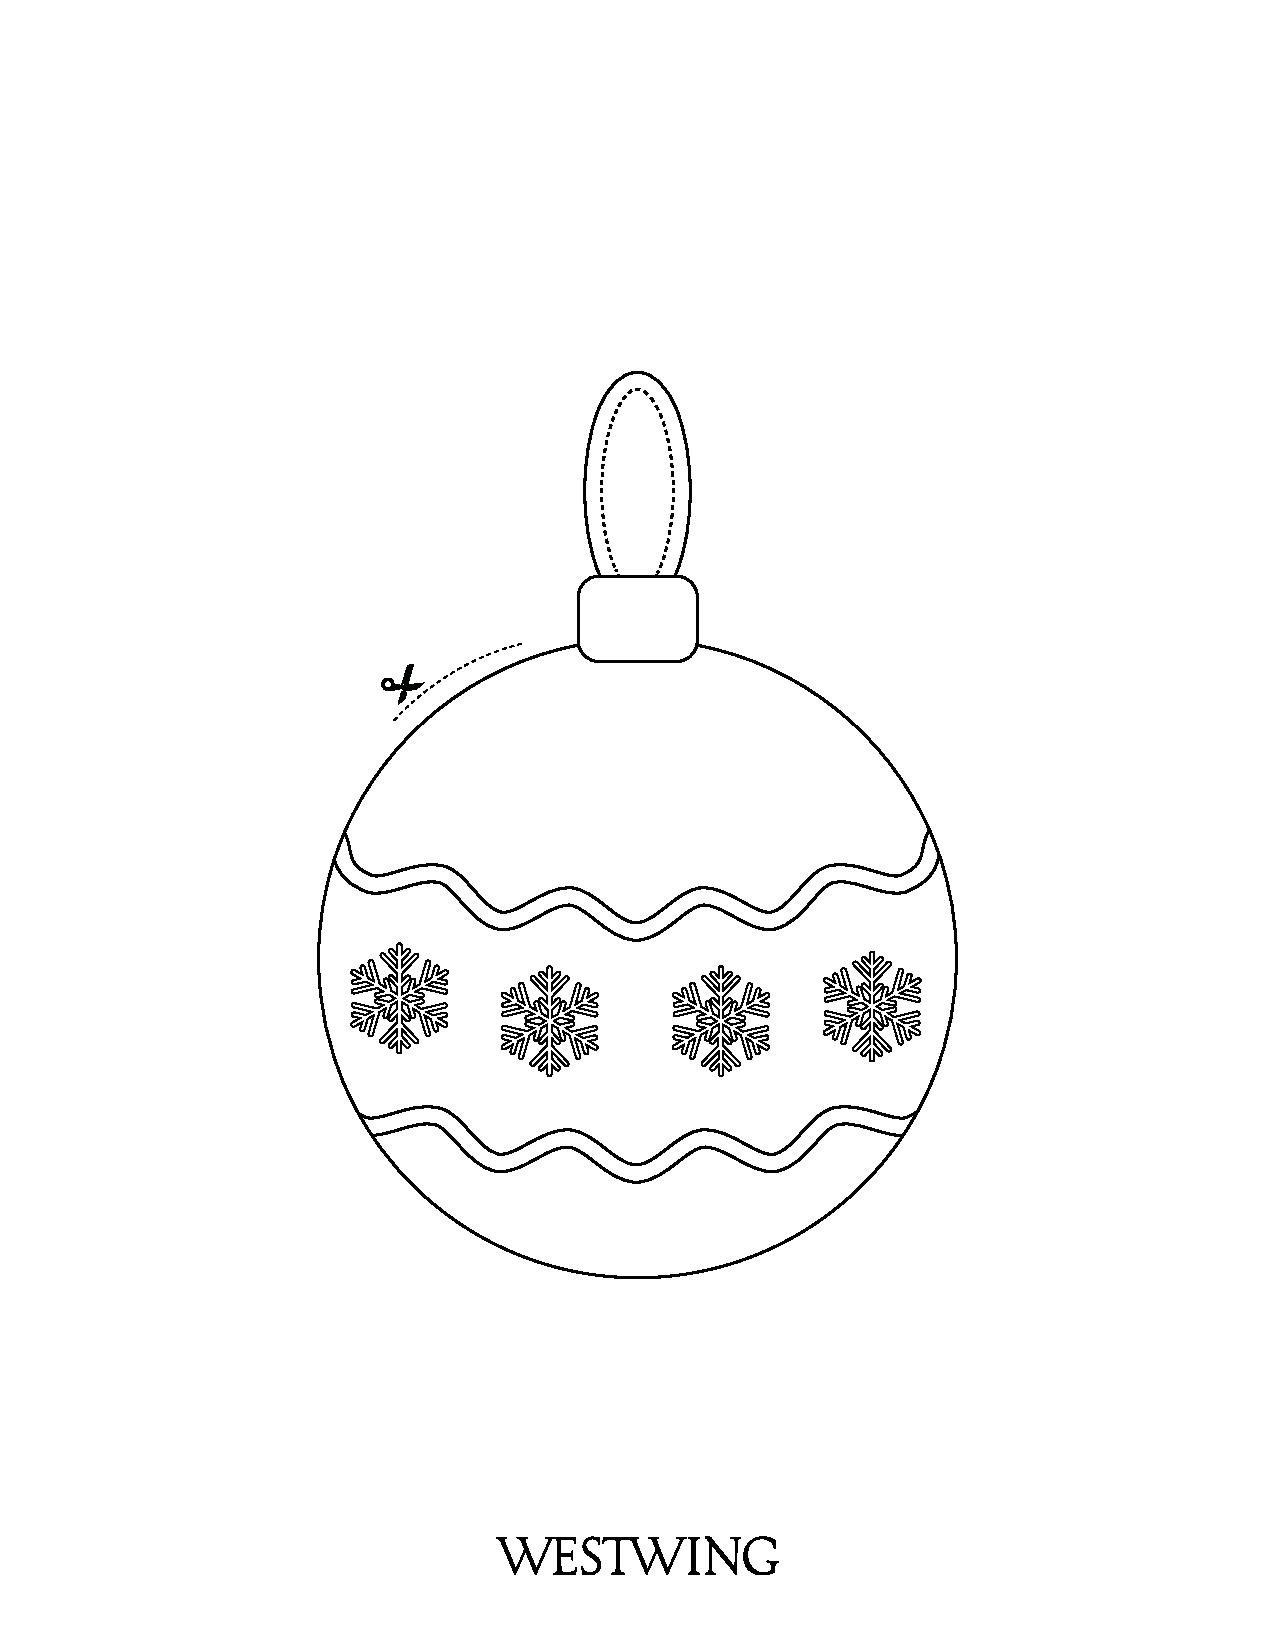 Christmas tree ball to cut out and color for children, very simple